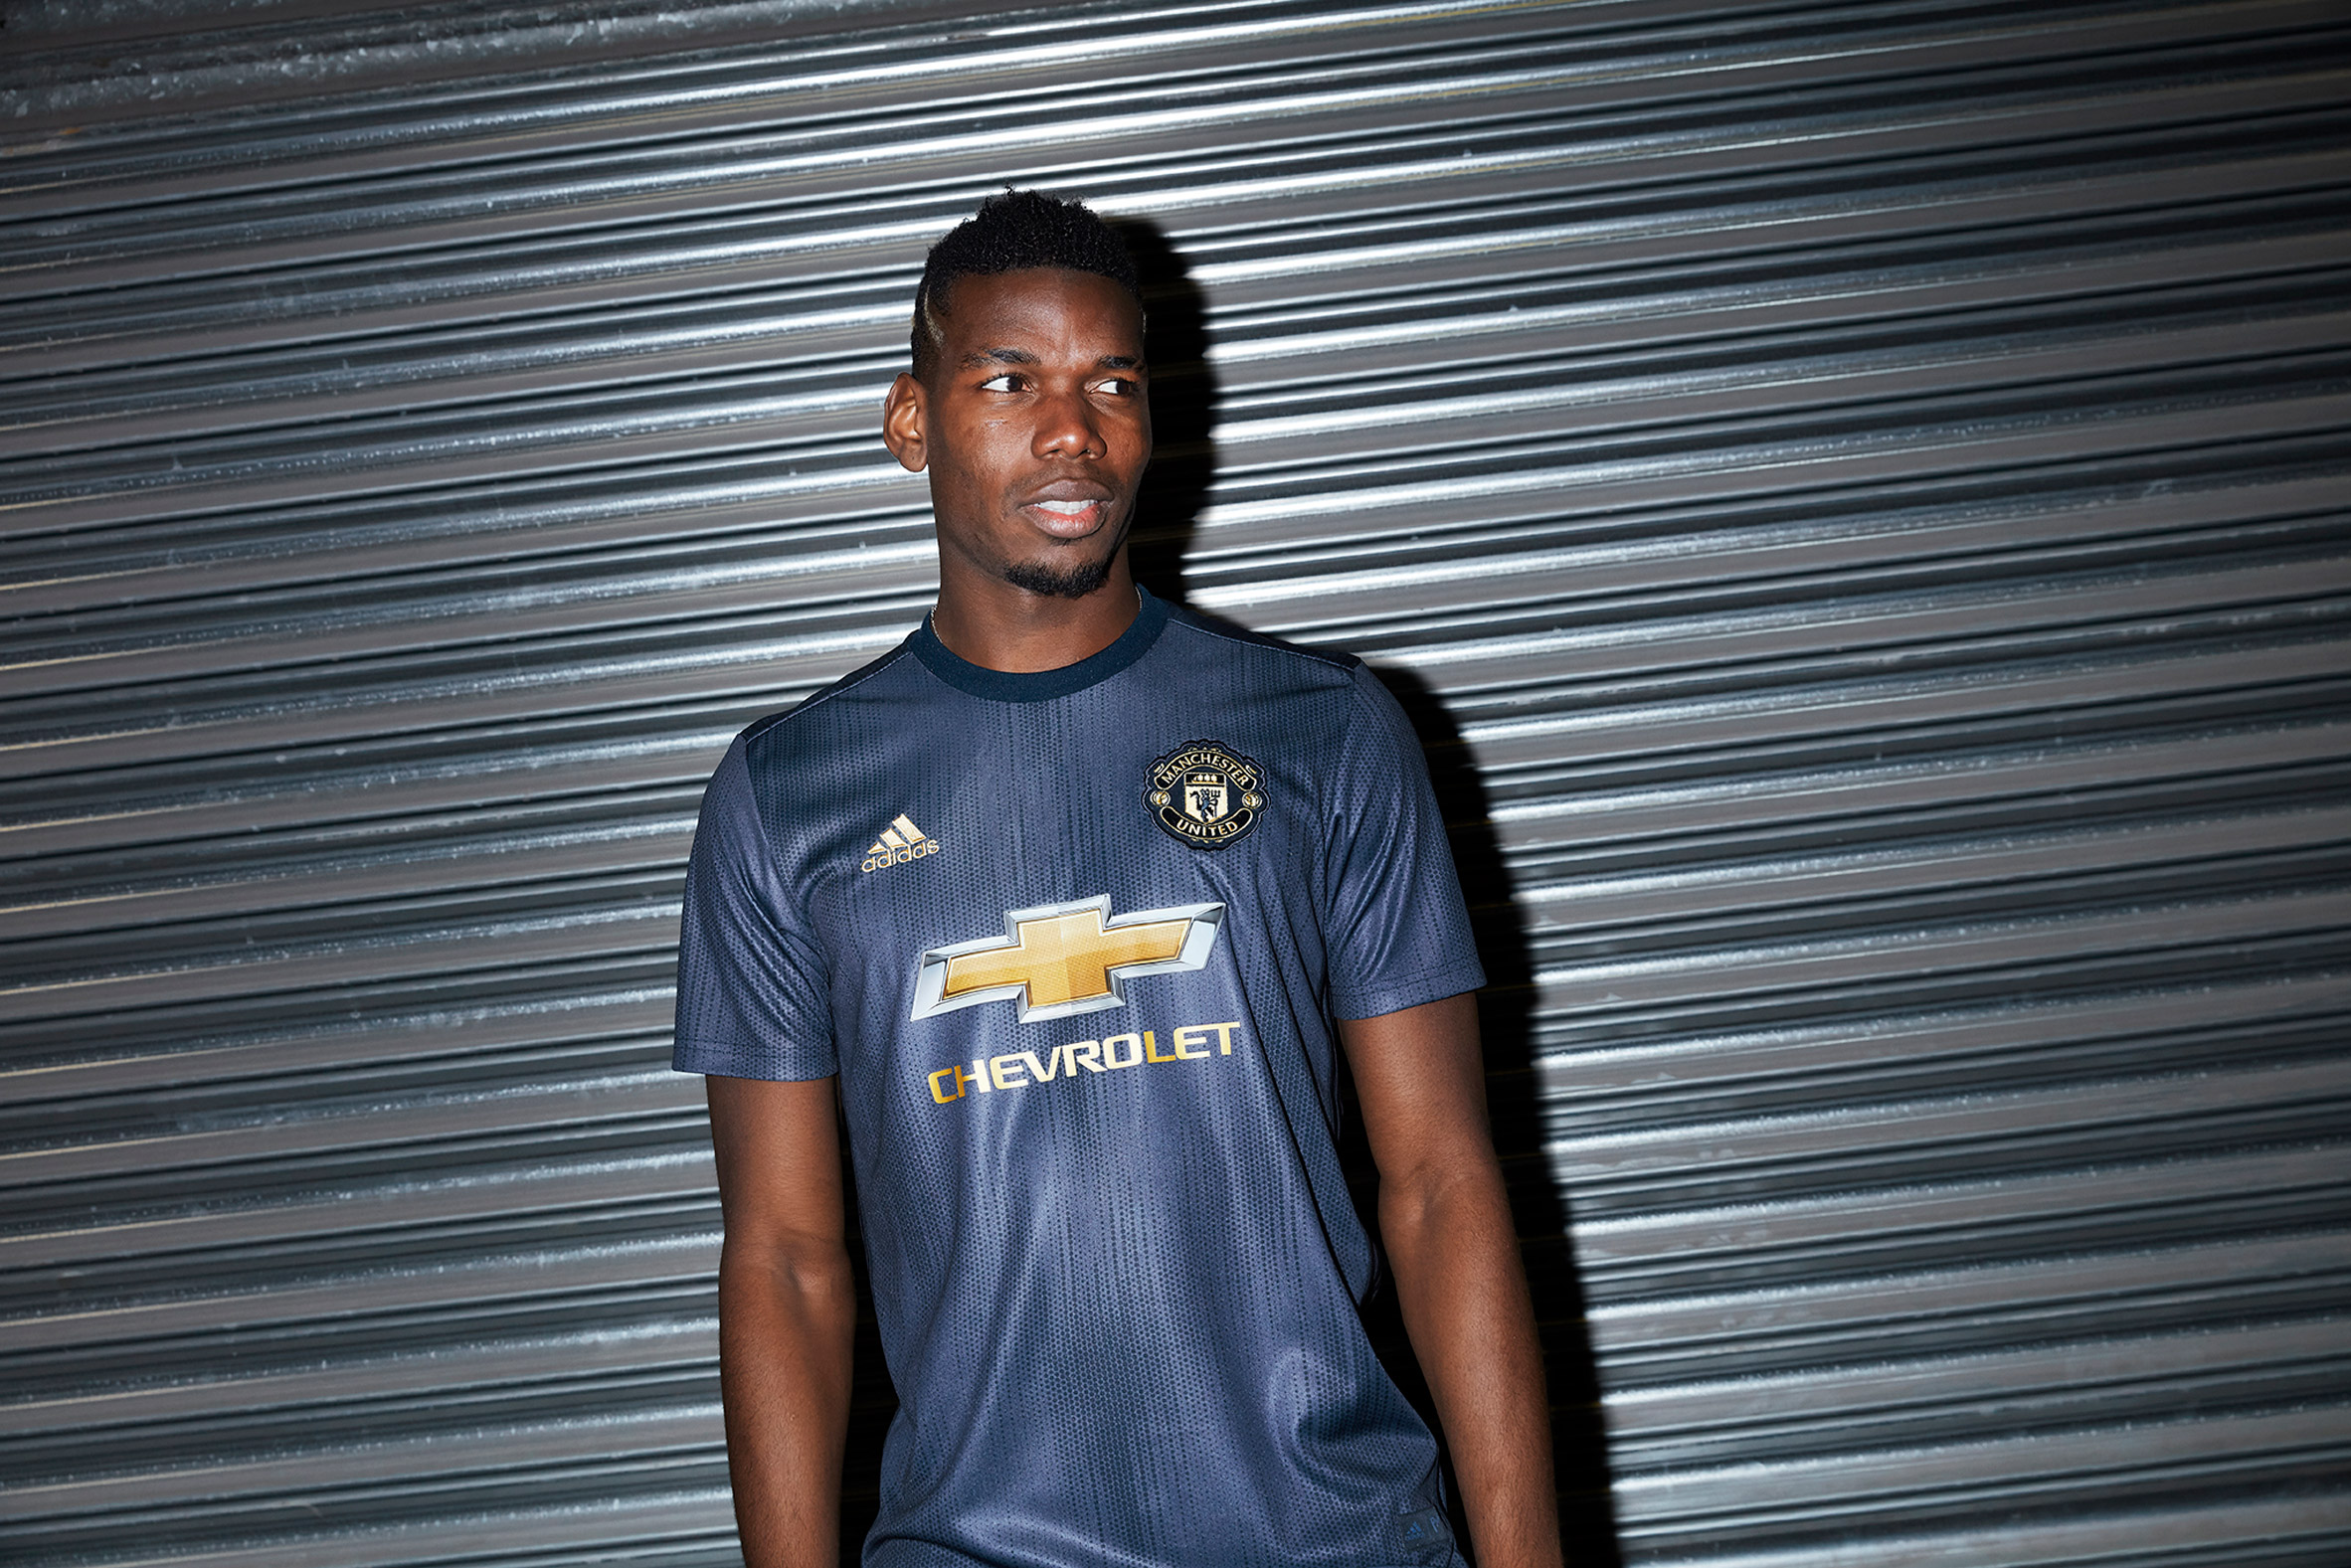 Adidas' latest Manchester United kits are made from recycled ocean plastic